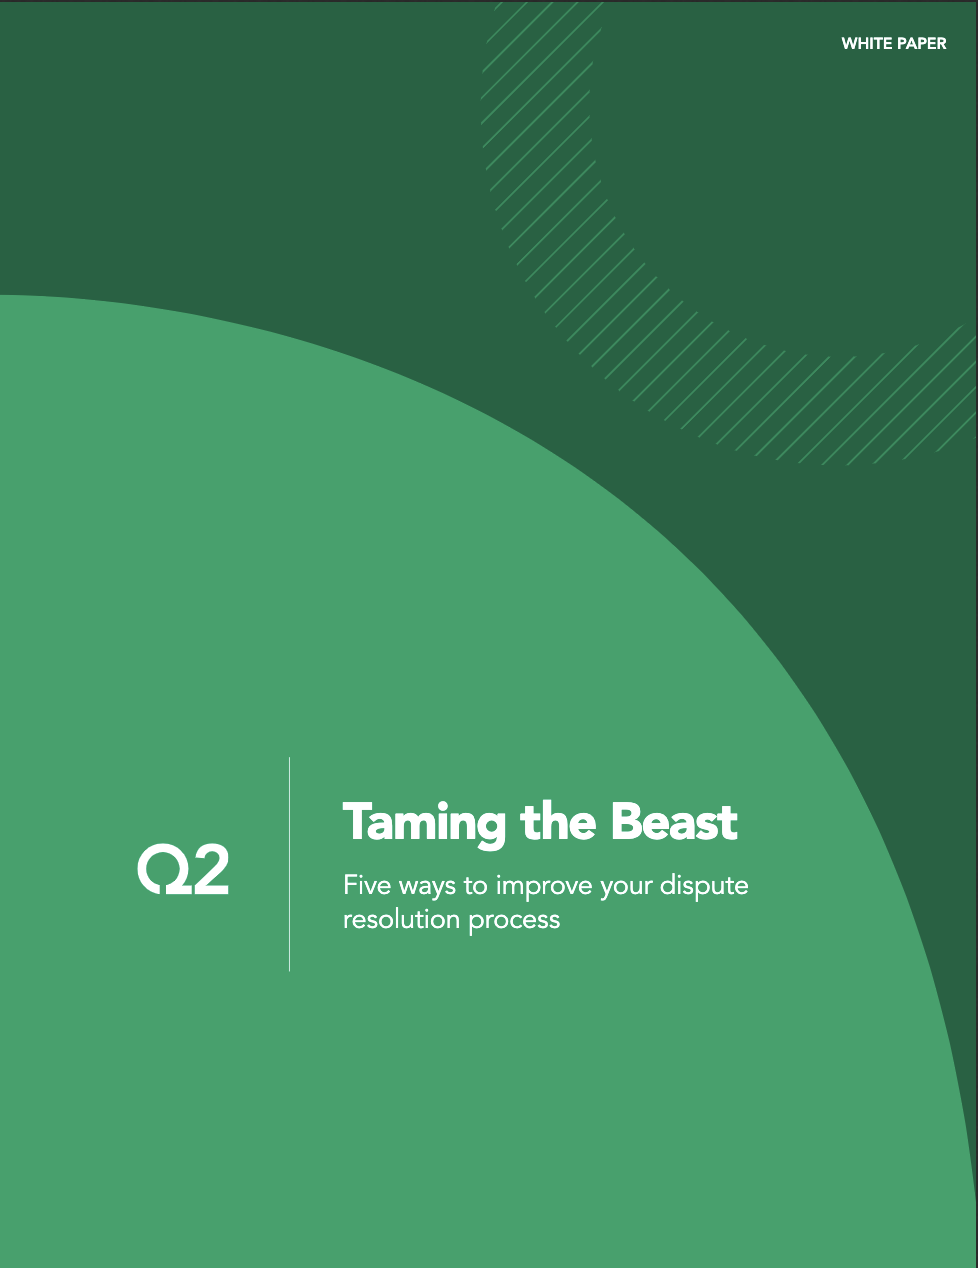 Taming the Beast: 5 Ways to Improve Your Dispute Resolution Process